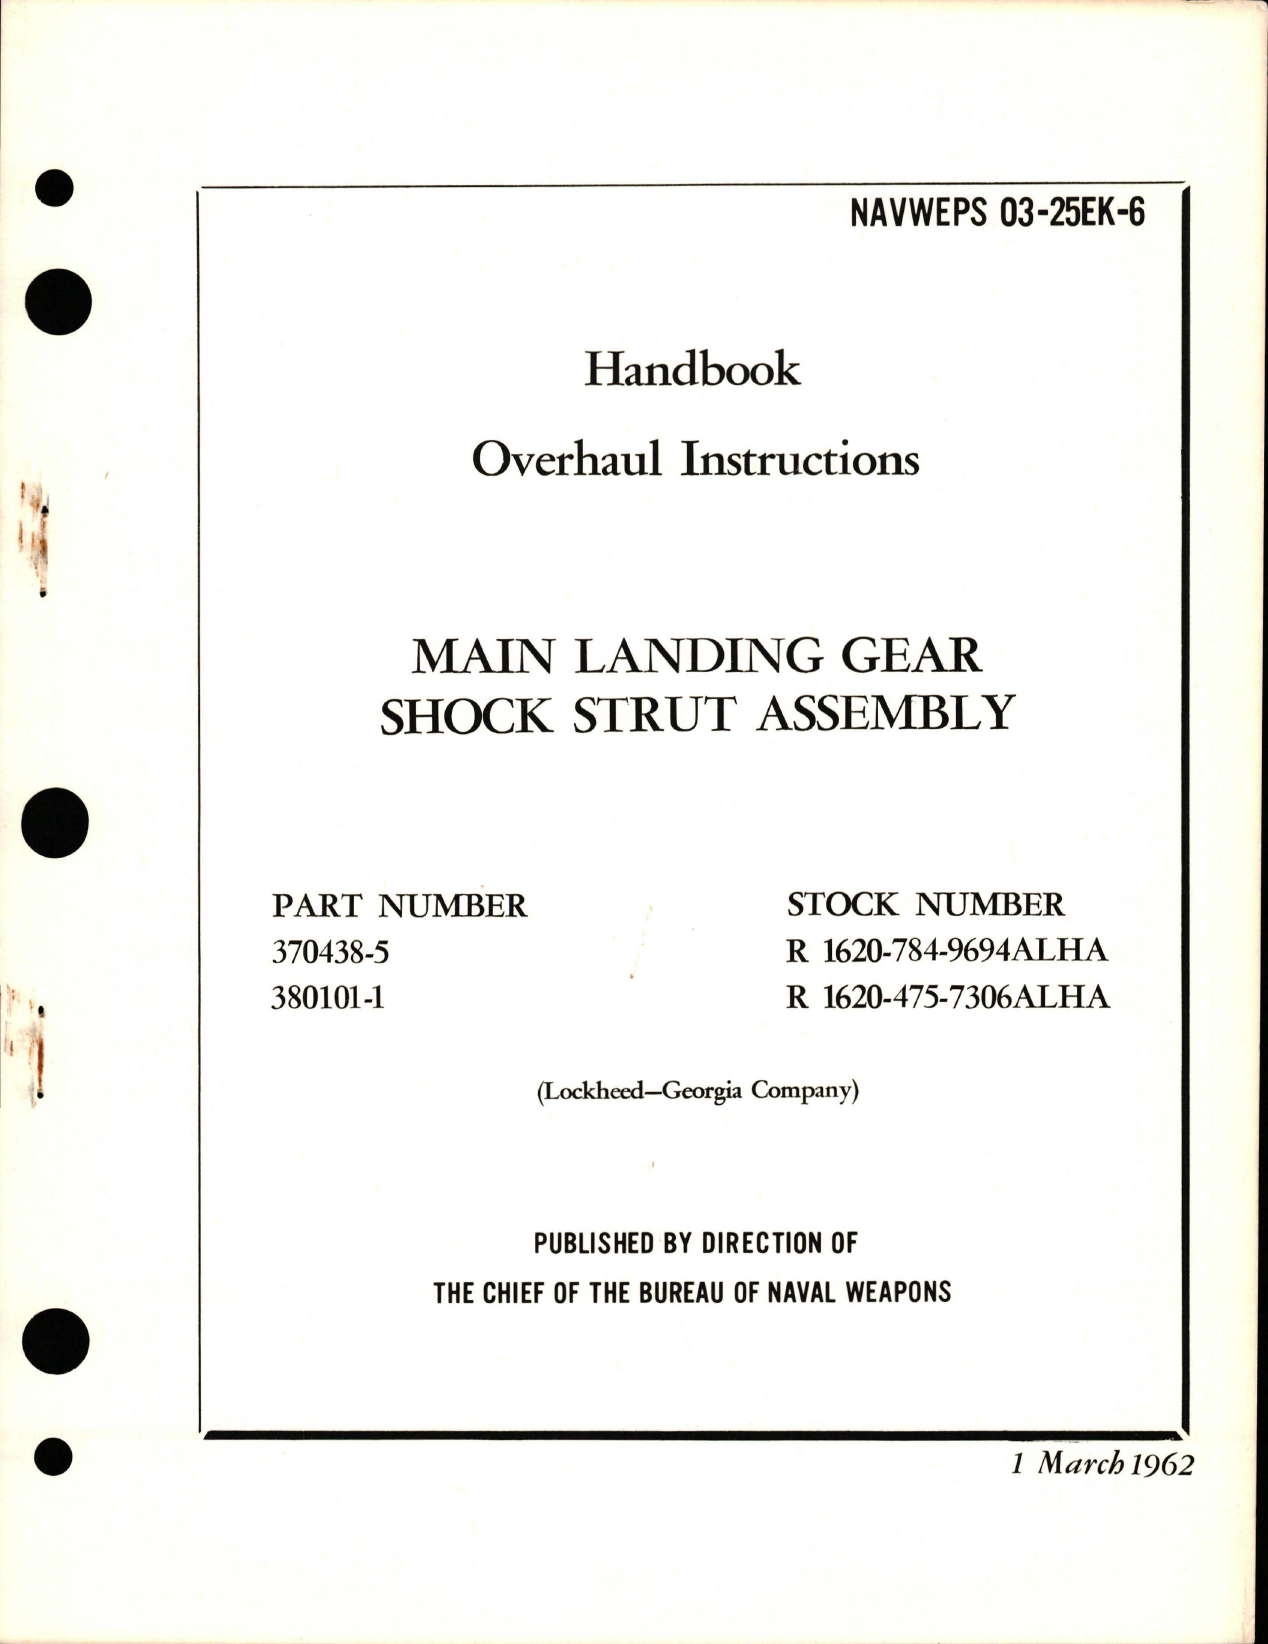 Sample page 1 from AirCorps Library document: Overhaul Instructions for Main Landing Gear Shock Strut Assembly - Part 370438-5 and 380101-1